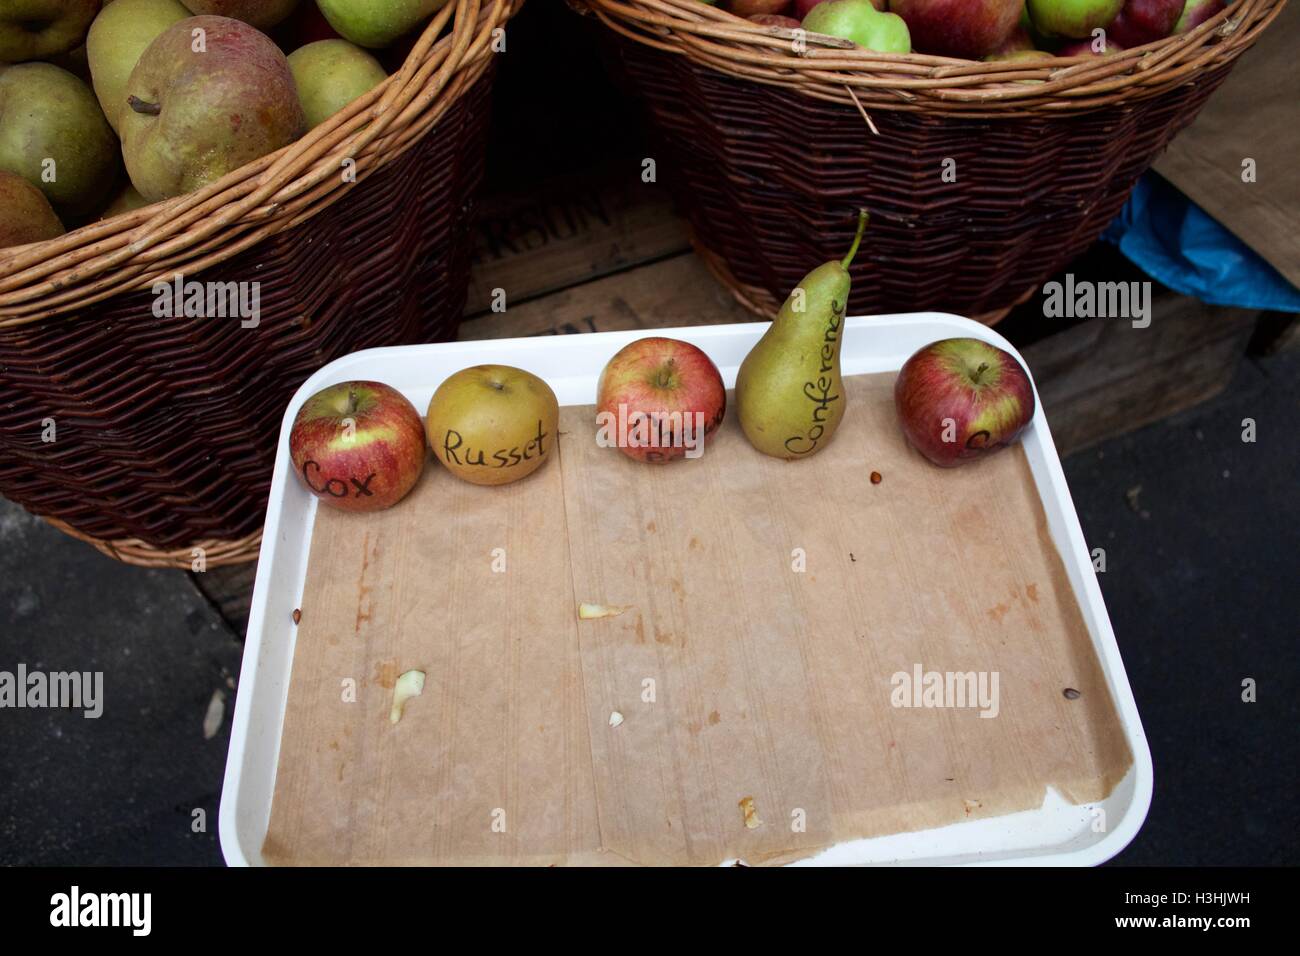 Shallow Depth of Field showing a selection of apples. Stock Photo